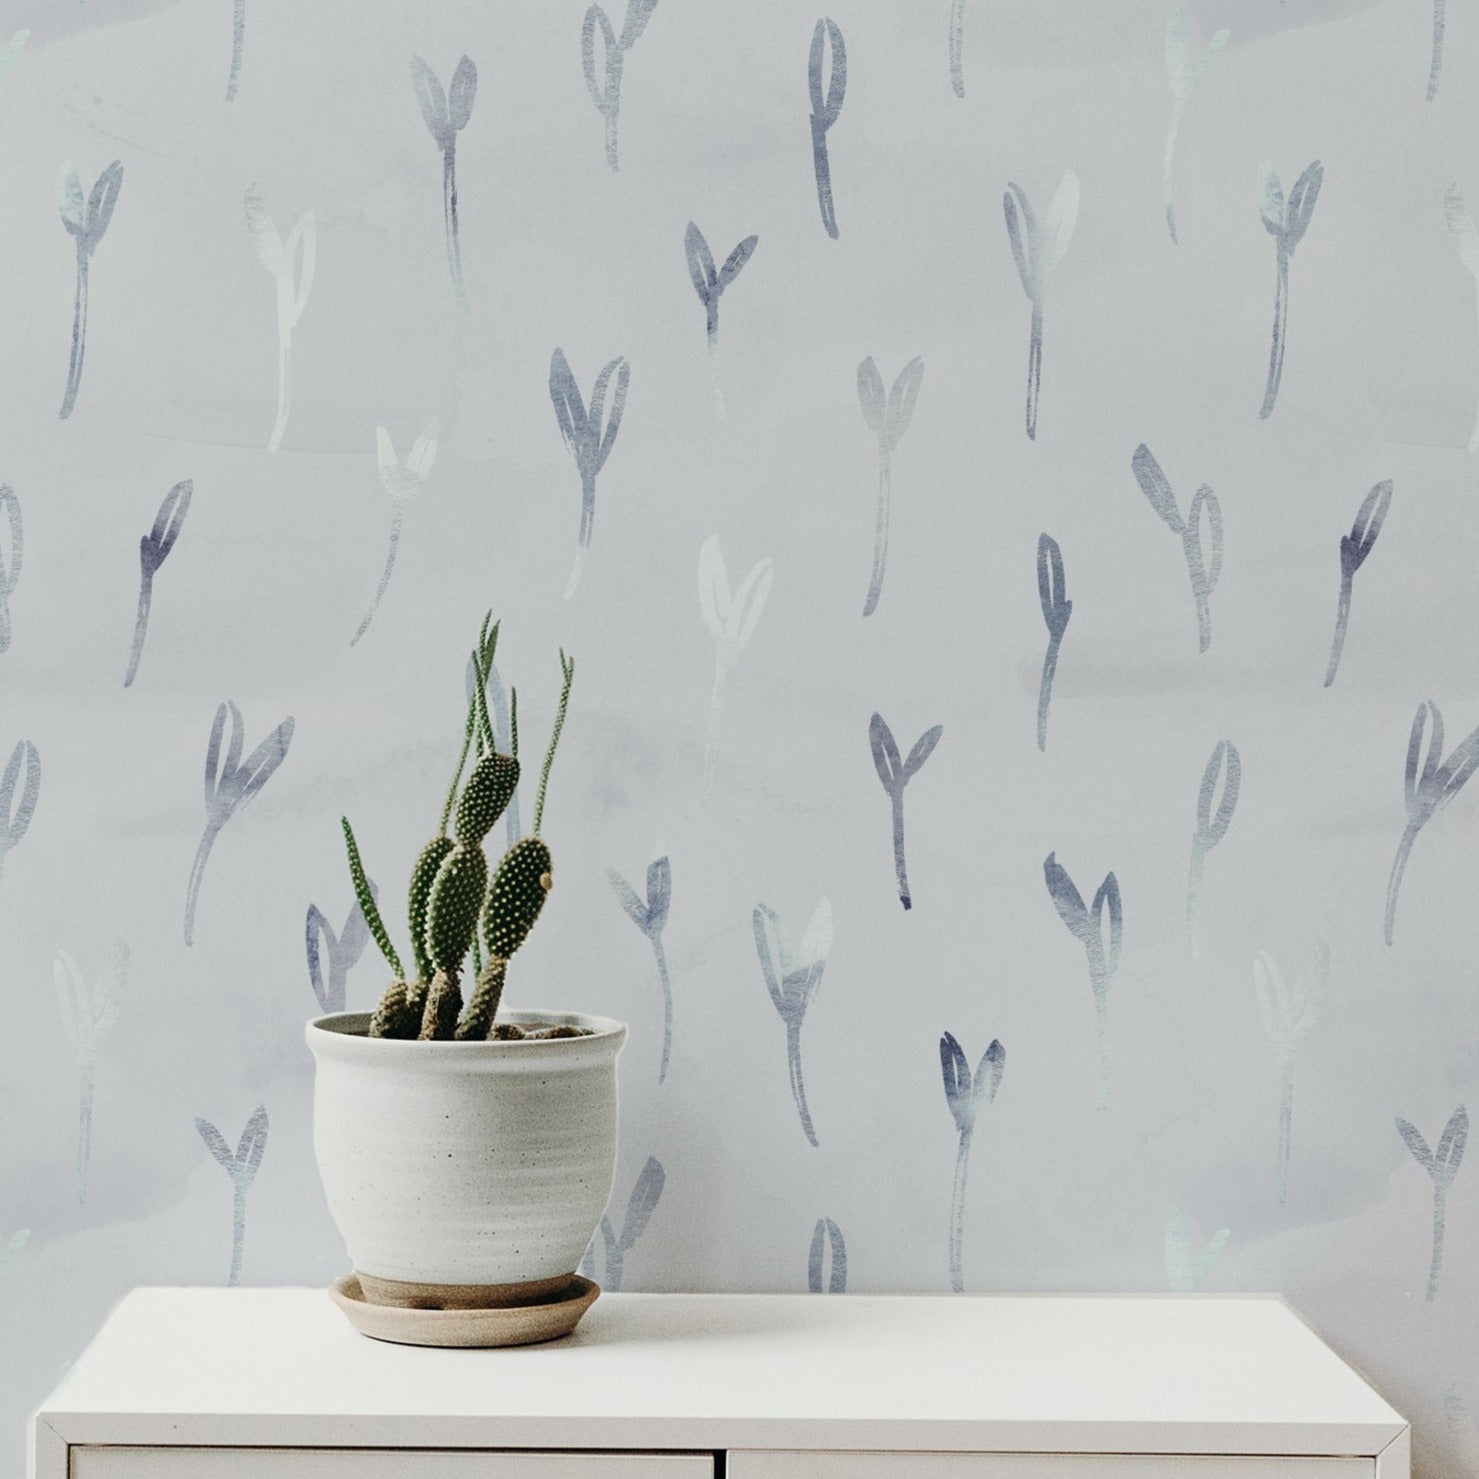 Floral Foil Wallpaper displayed in a room setting, enhancing the room's decor with its light, ethereal plant motifs in soothing colors, complemented by minimalist furniture and a potted cactus.